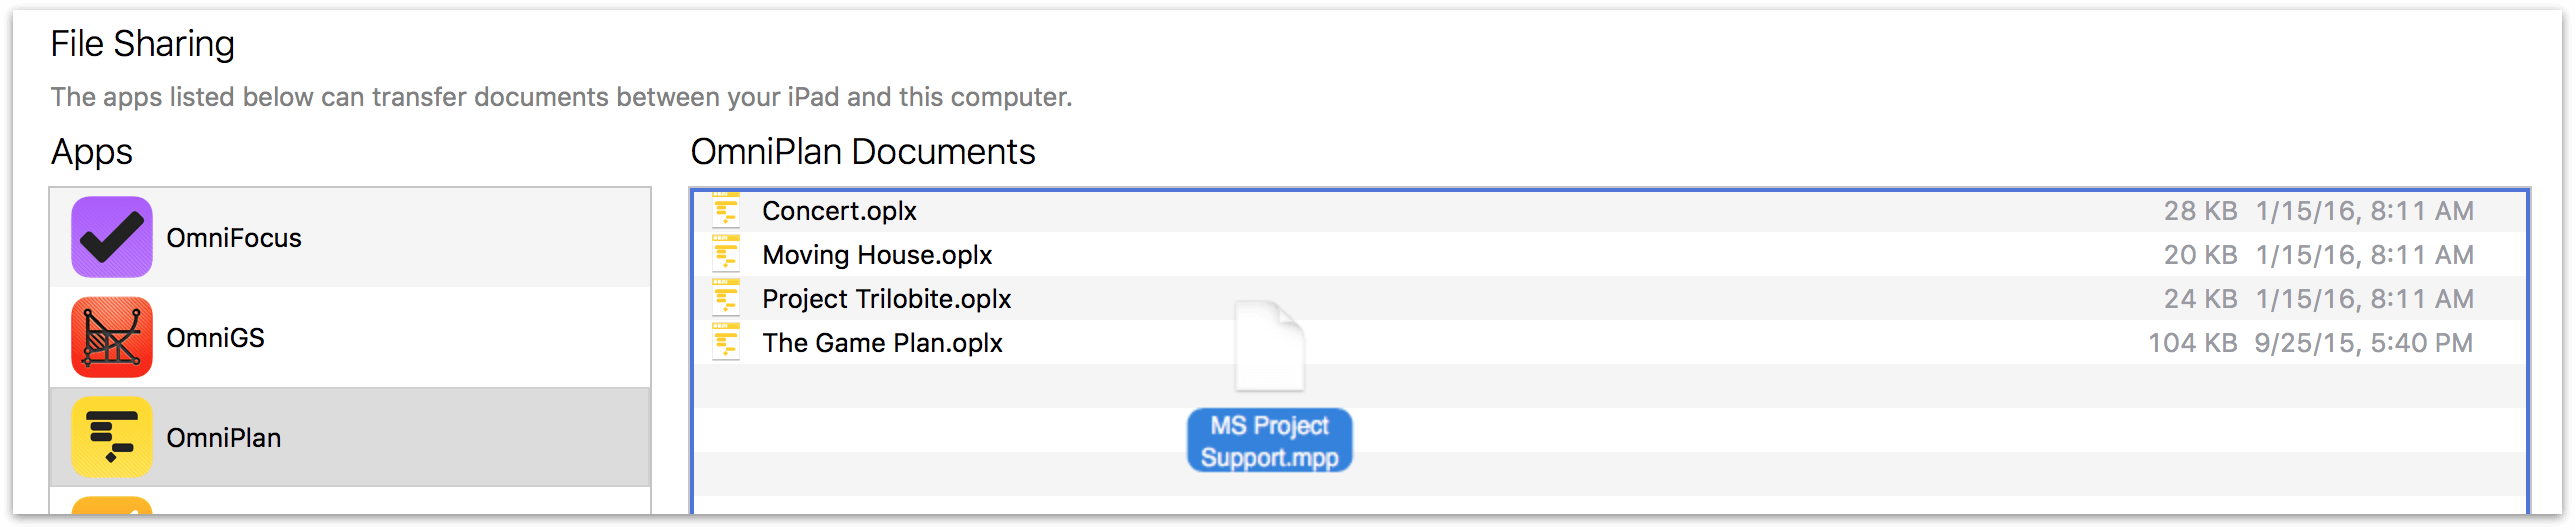 Importing a Microsoft Project document with iTunes on OS X.